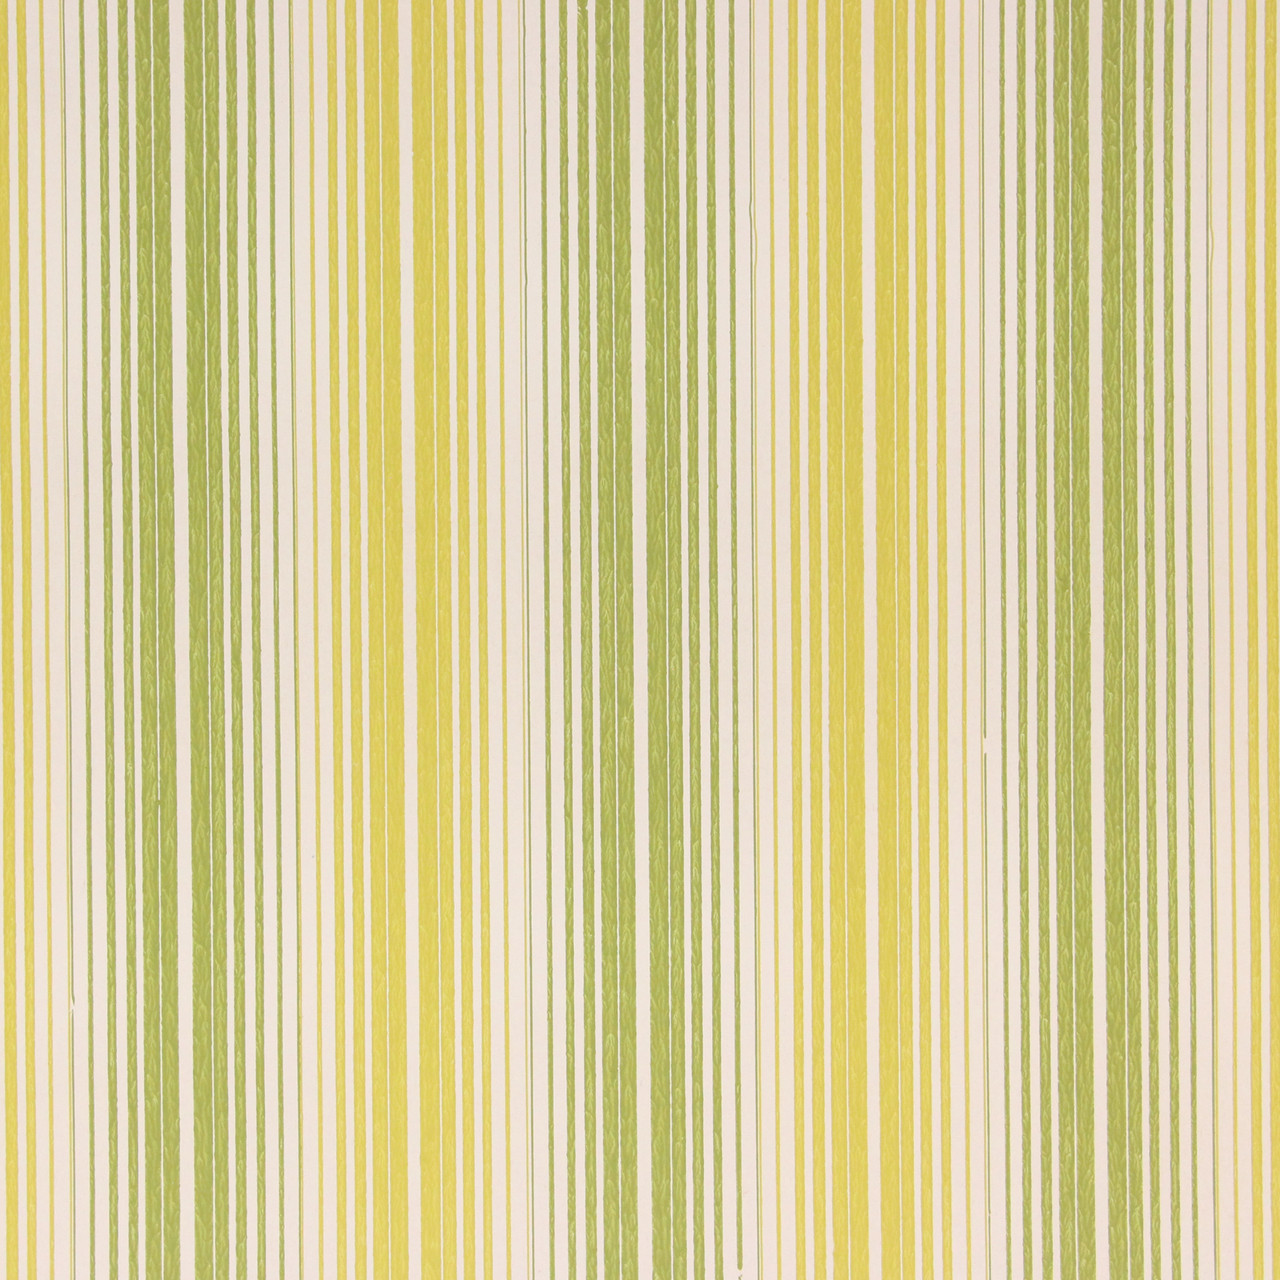 Free download Green striped wallpaper background [1600x1600] for your  Desktop, Mobile & Tablet | Explore 49+ Green Striped Wallpaper | Dark Green  Striped Wallpaper, Striped Wallpaper Designs, Green and White Striped  Wallpaper